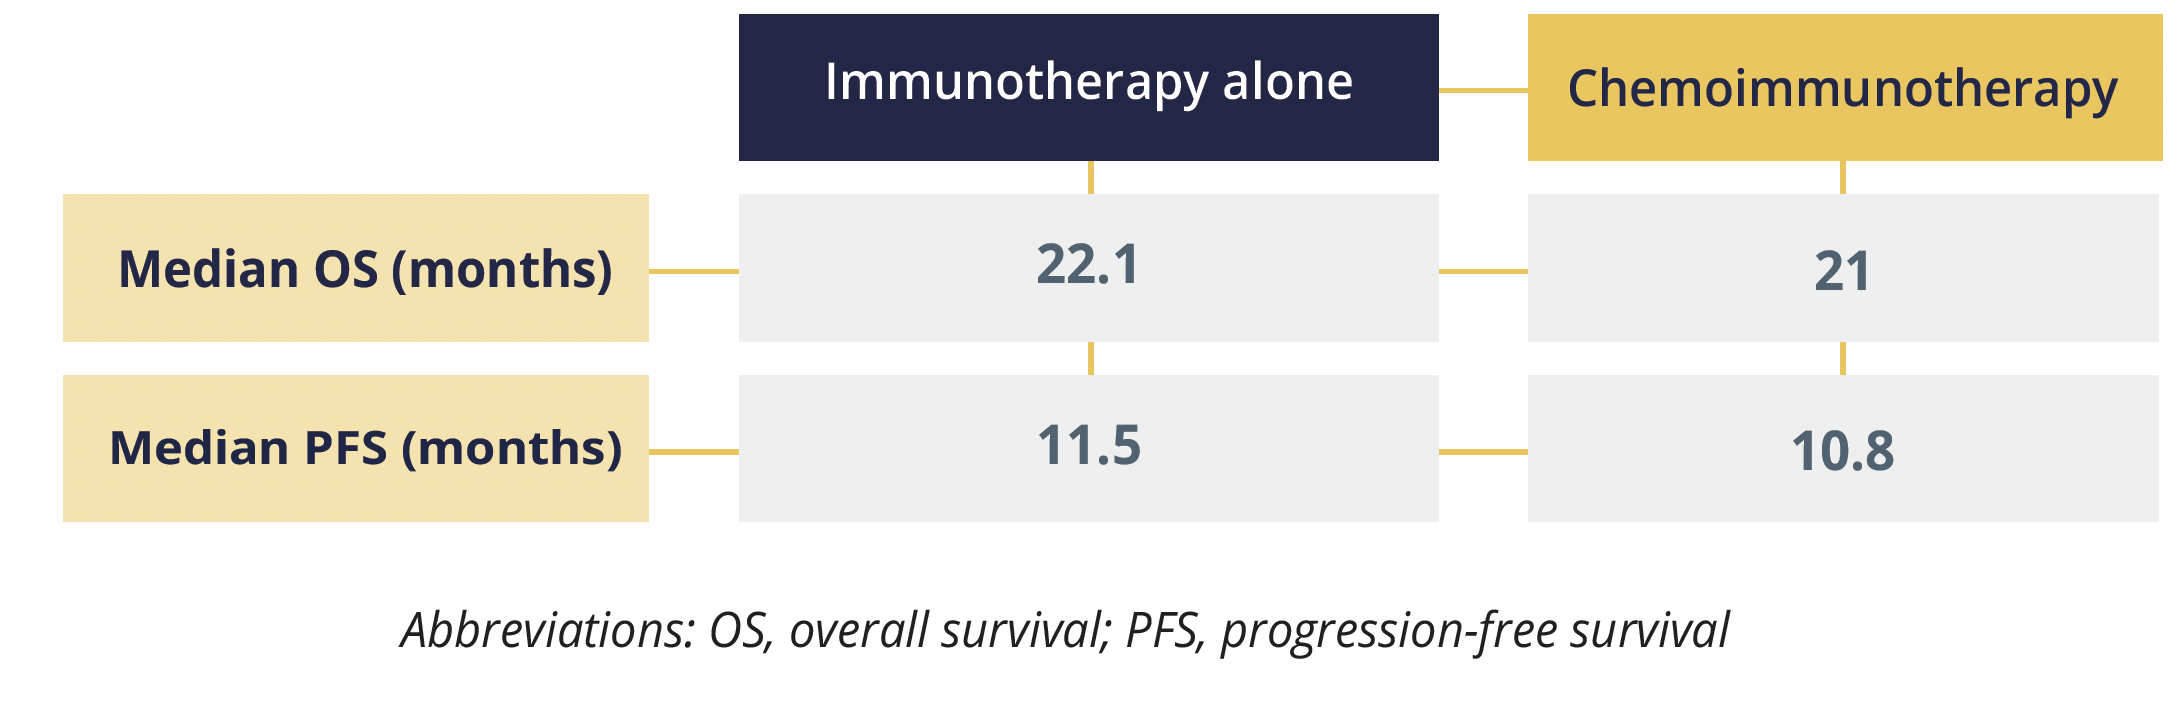 Survival outcomes not significantly improved with chemoimmunotherapy over immunotherapy alone